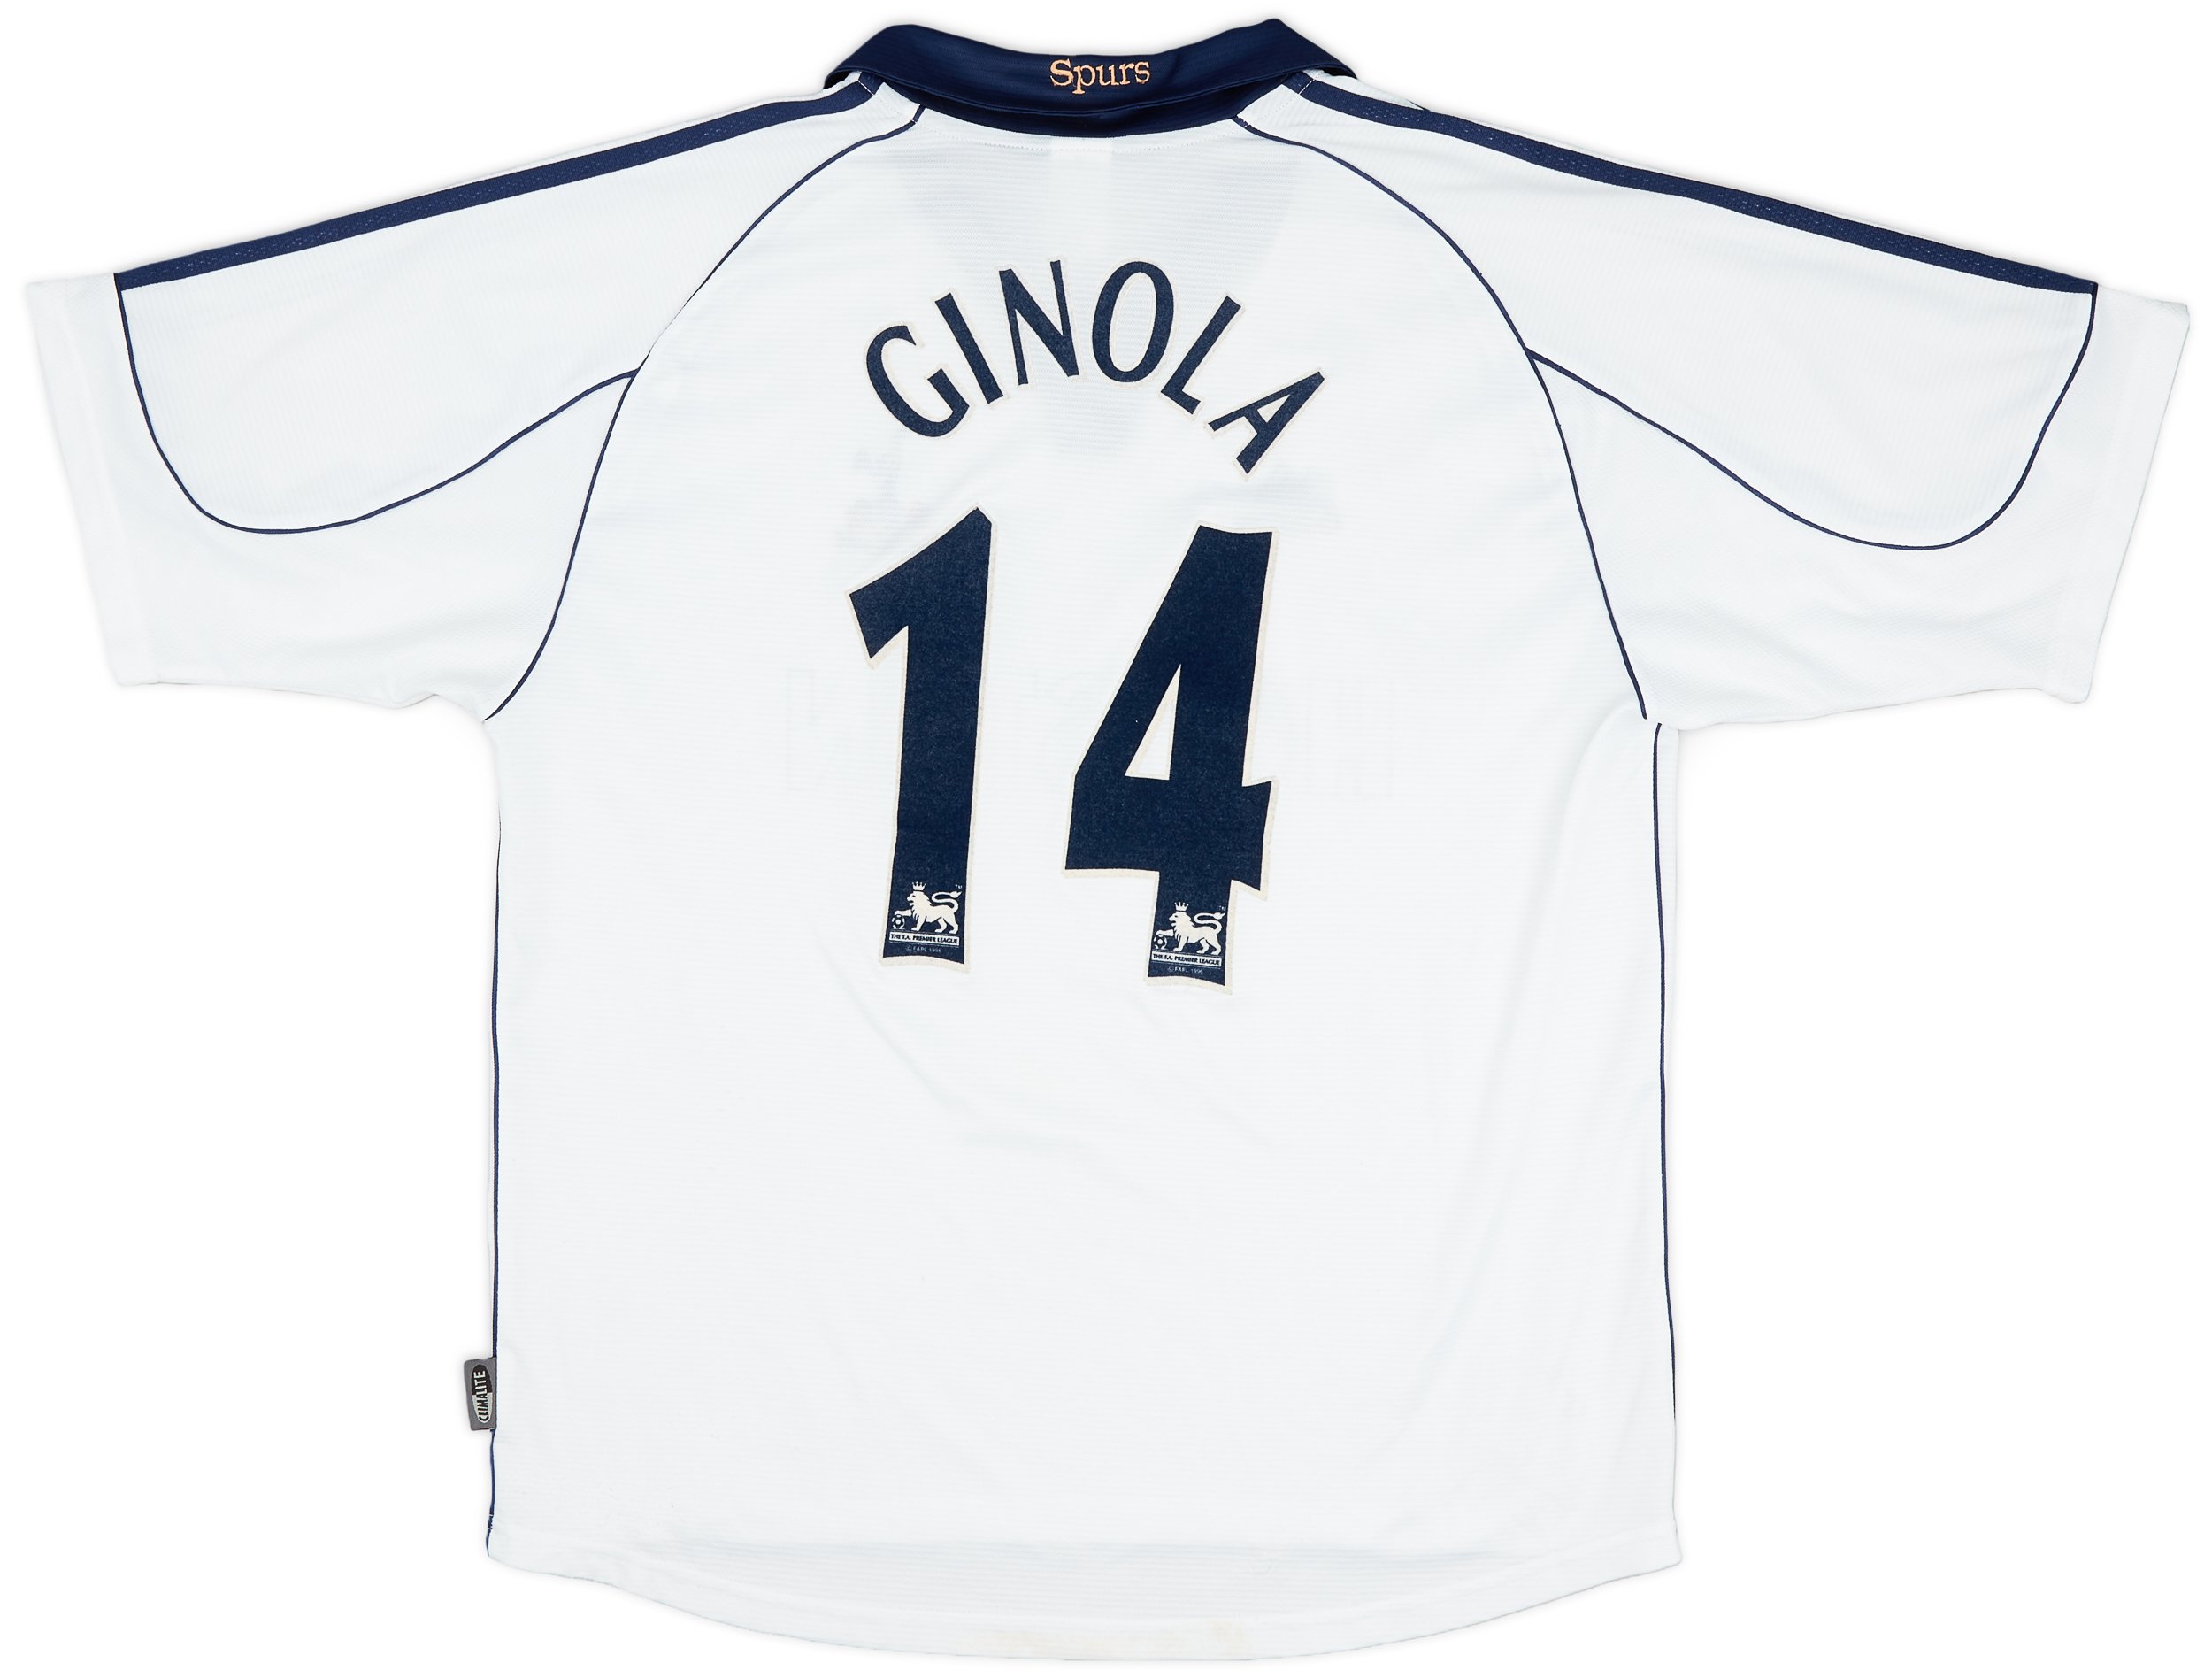 David 🇫🇷 get this spurs away shirt 99/01 by tapping the link in our bio  ☝️#ginola #davidginola #spurs #thfc #t…